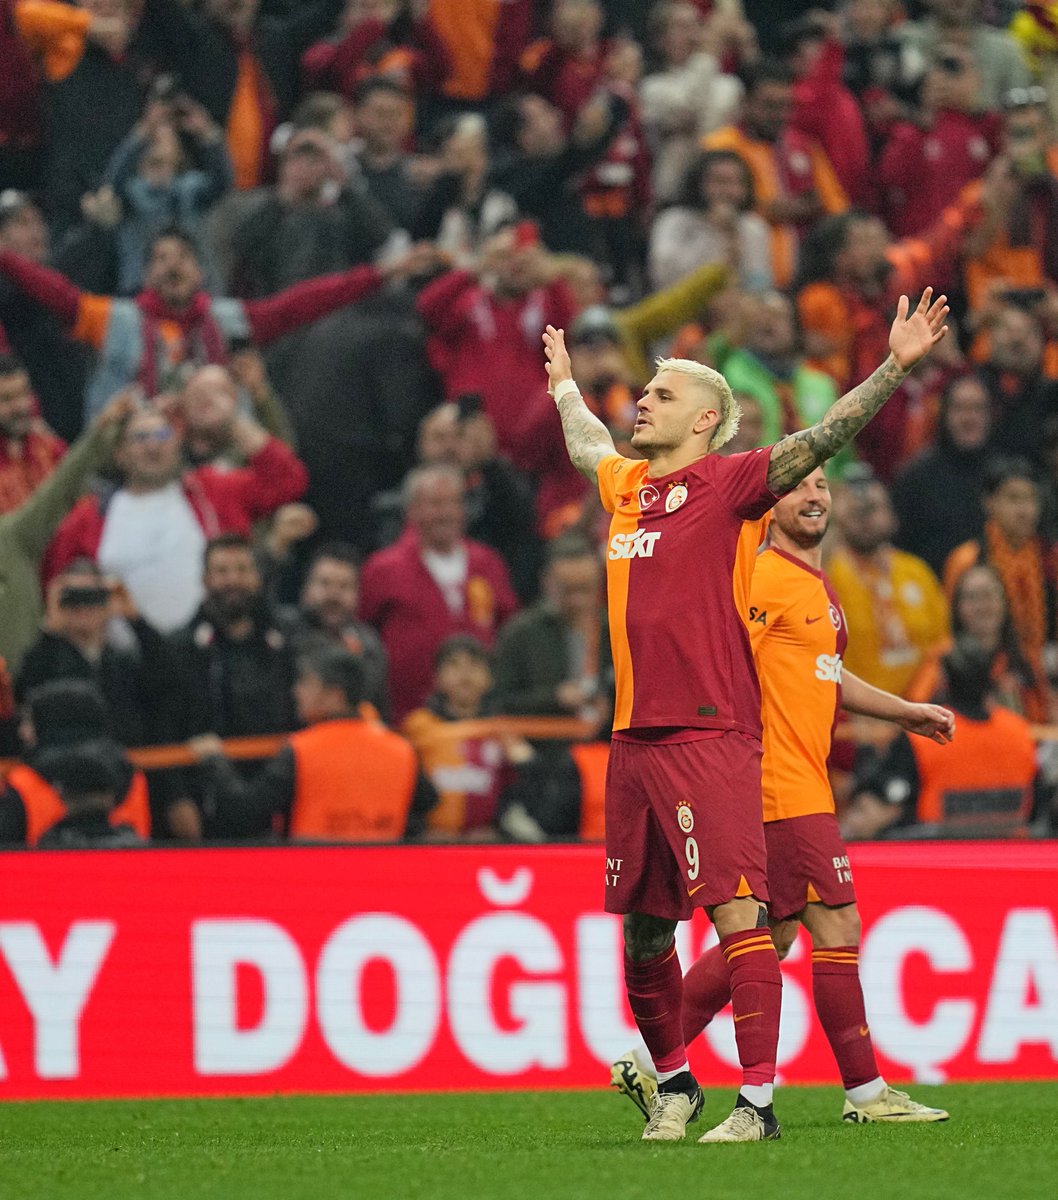 FULL TIME: Galatasaray win 6-1 !!!!!! TOP OF THE LEAGUE WITH THREE GAMES TO GO. SEVEN POINTS CLEAR